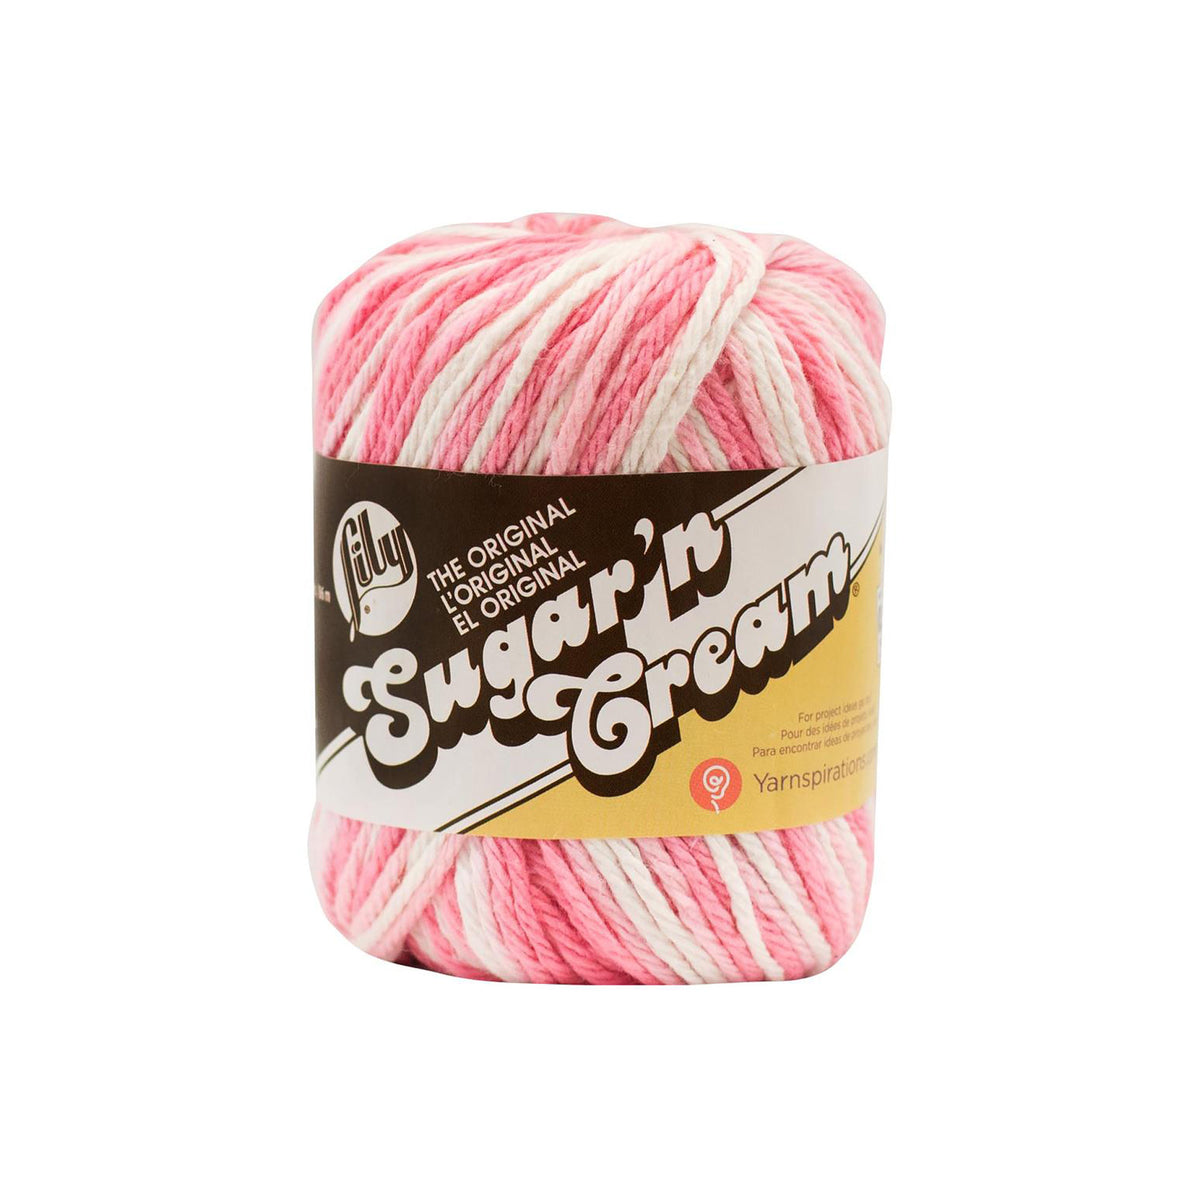 Sugar 'n Cream Yarn 2 oz Cotton 4 Ply Worsted Variegated ~Your